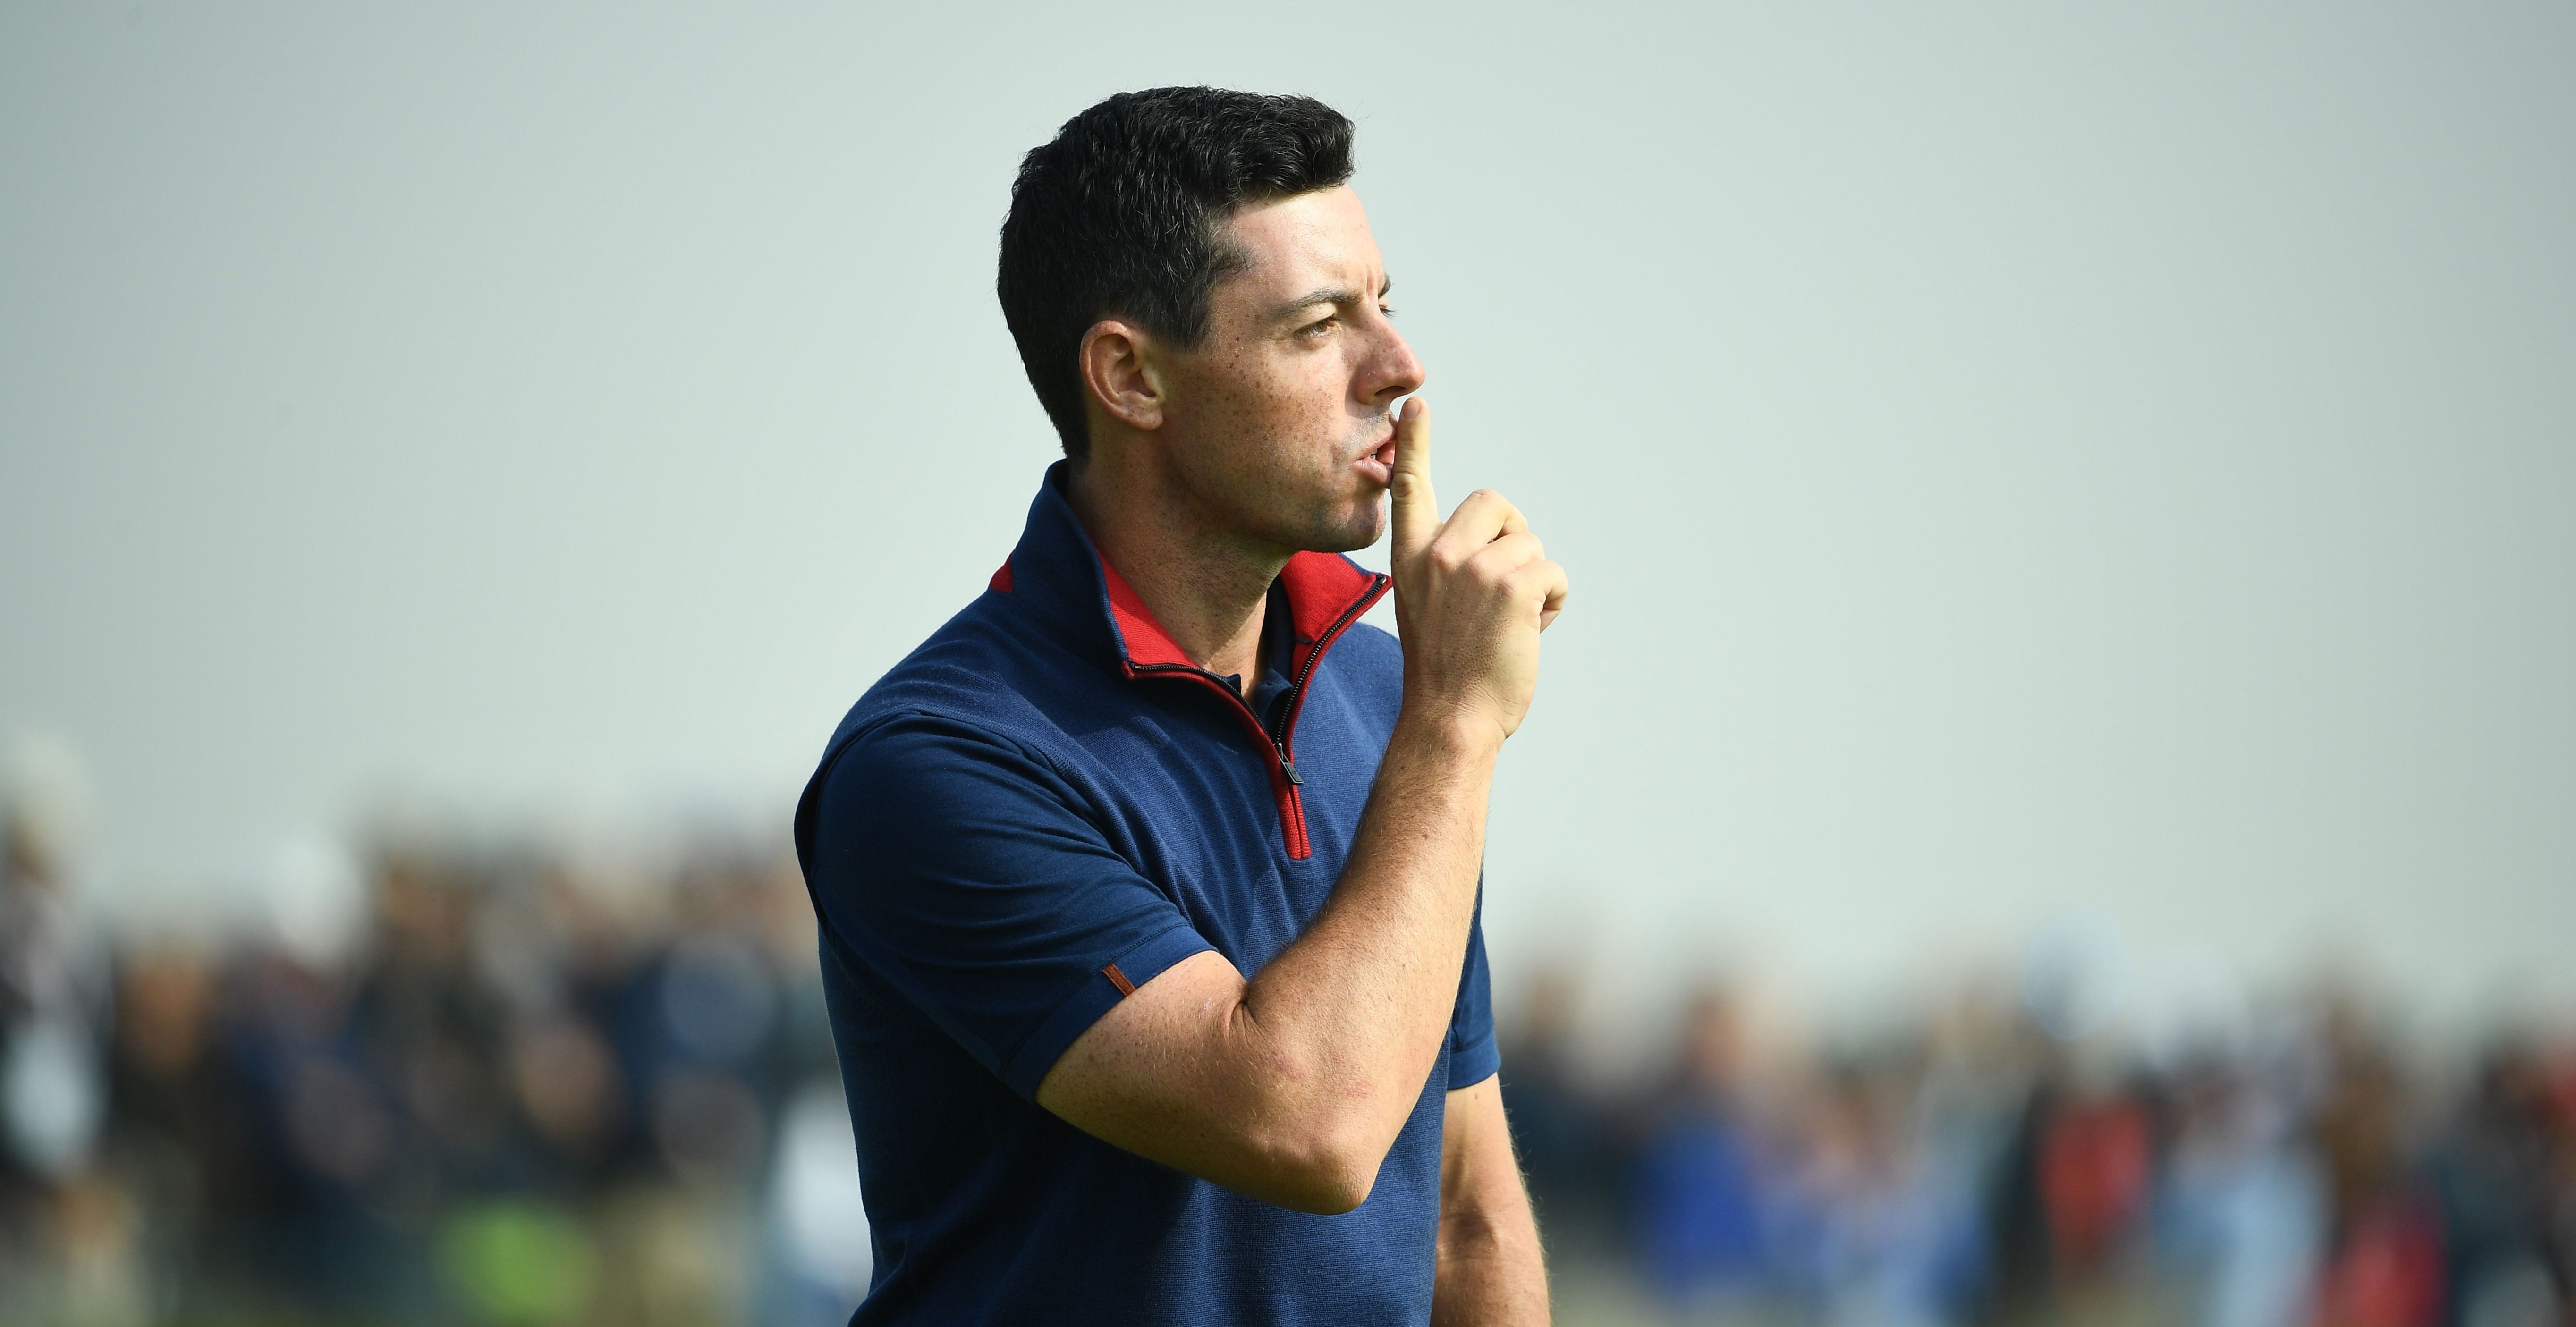 Europe's Northern Irish golfer Rory McIlroy reacts during his foursomes match on the first day of the 42nd Ryder Cup at Le Golf National Course at Saint-Quentin-en-Yvelines, south-west of Paris on September 28, 2018. (Photo by FRANCK FIFE / AFP) (Photo credit should read FRANCK FIFE/AFP/Getty Images)